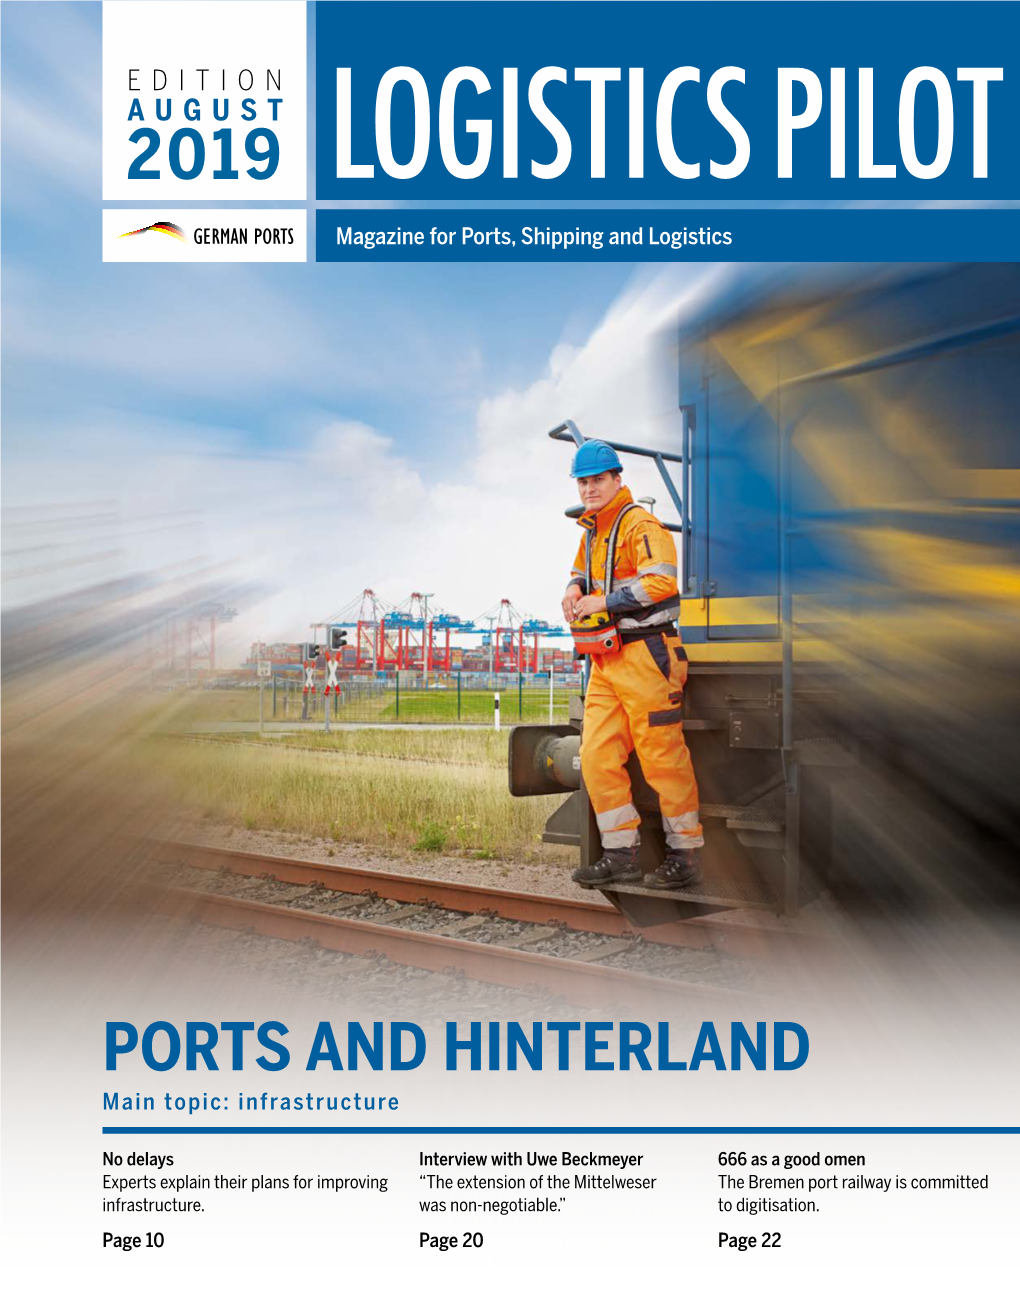 PORTS and HINTERLAND Main Topic: Infrastructure